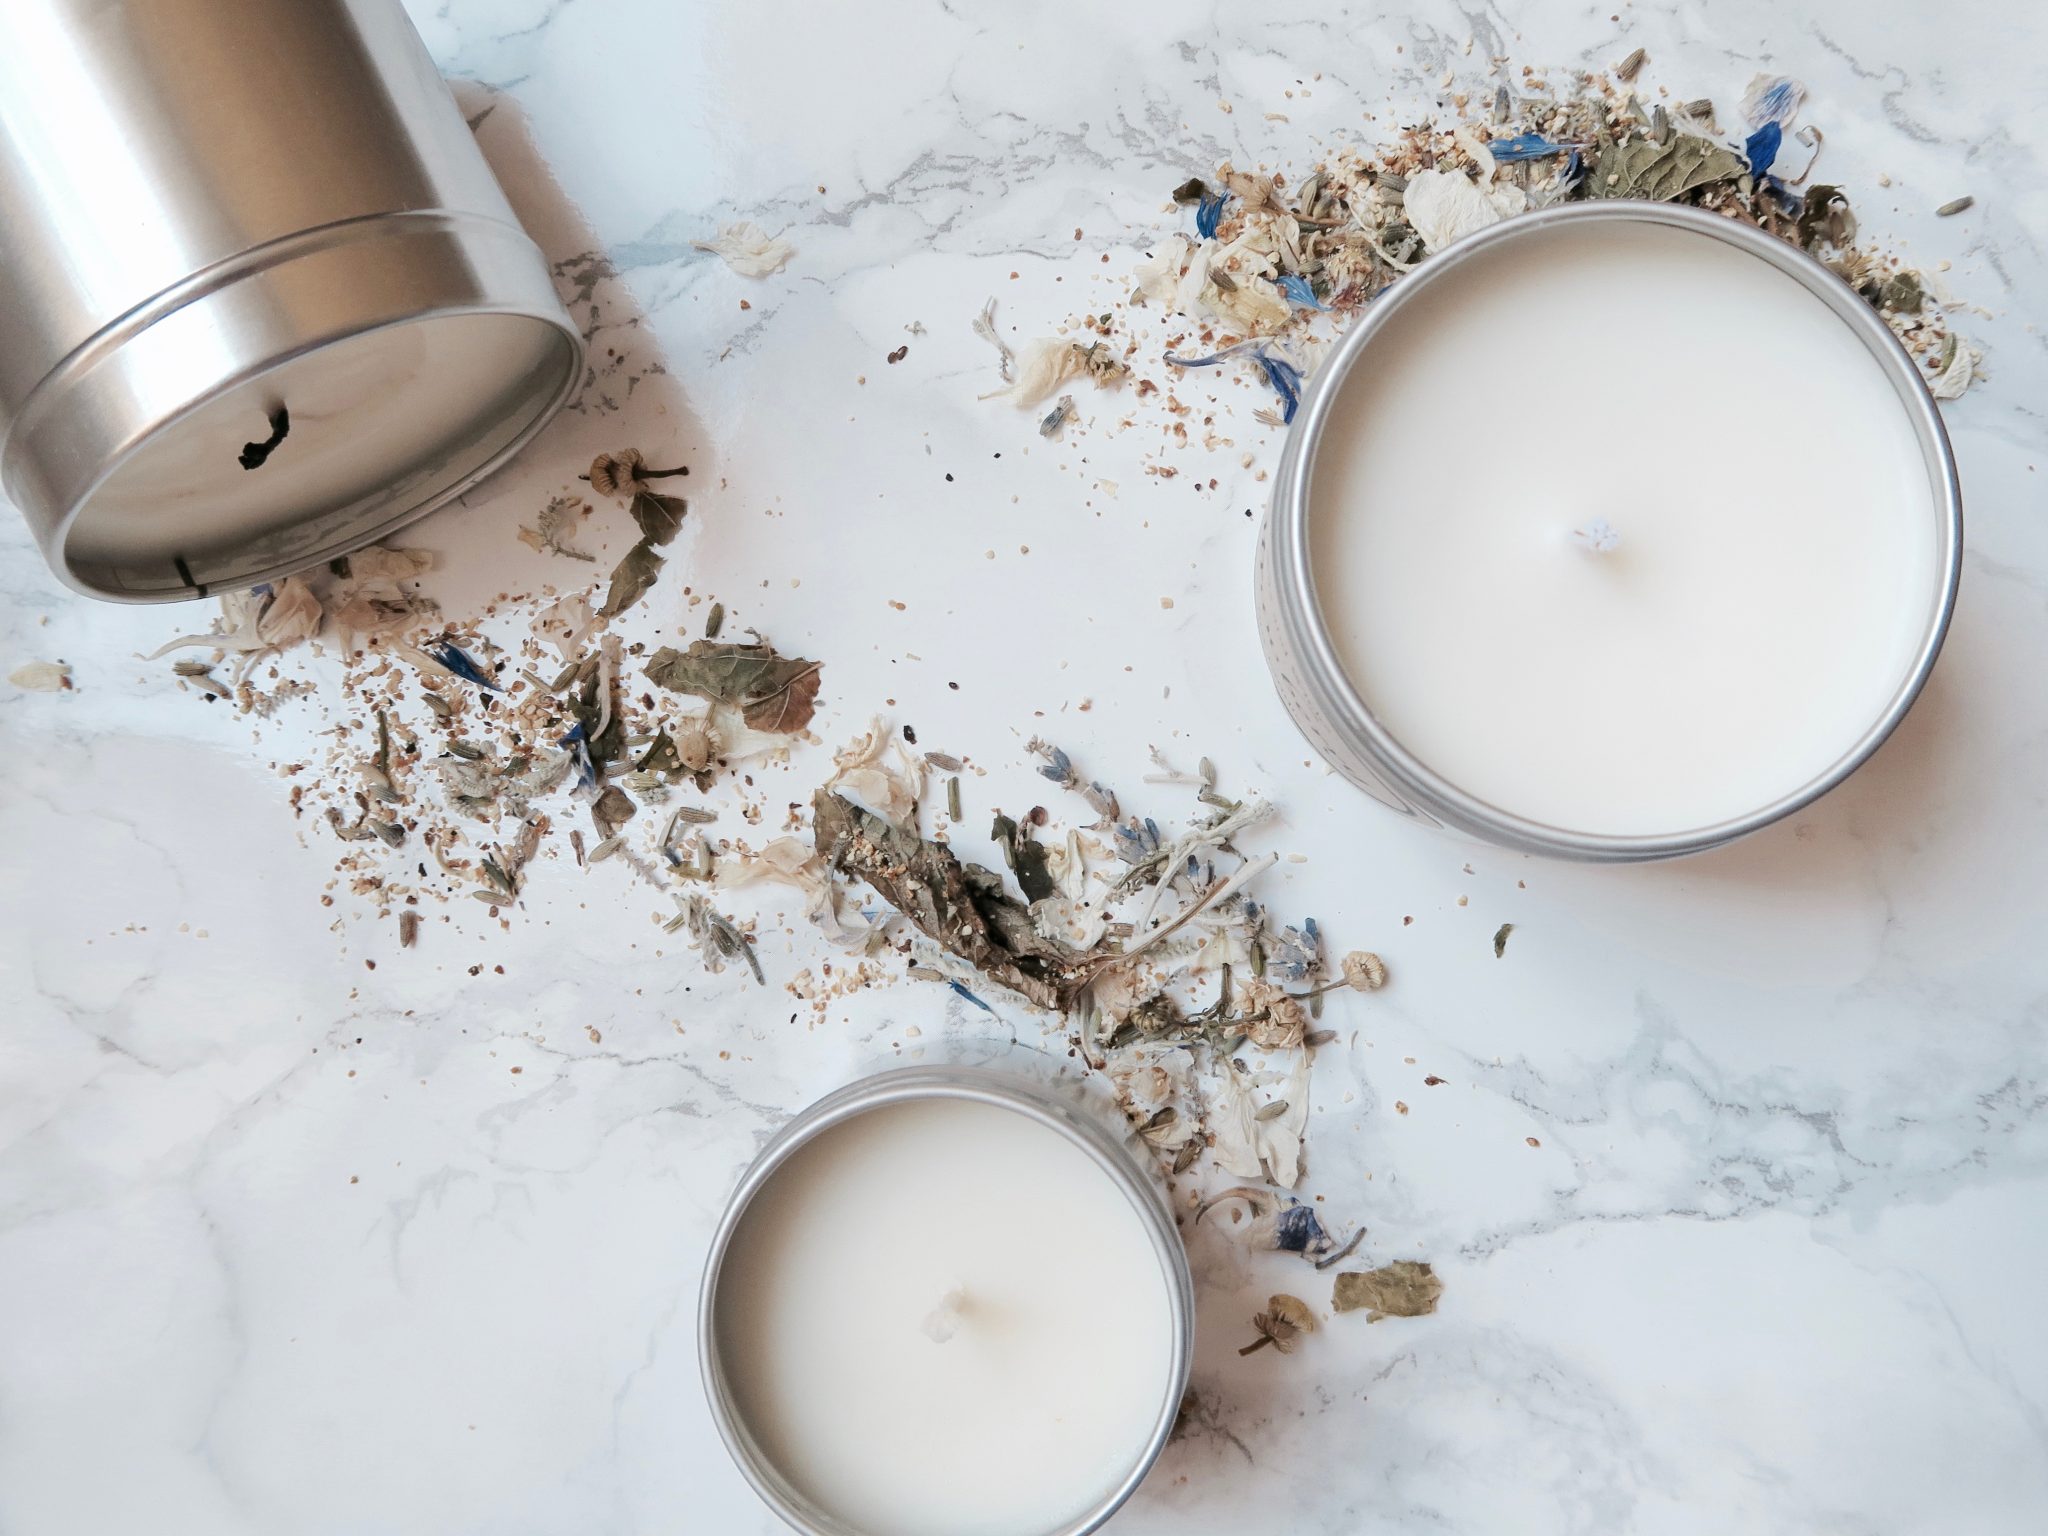 Why choose soy candles